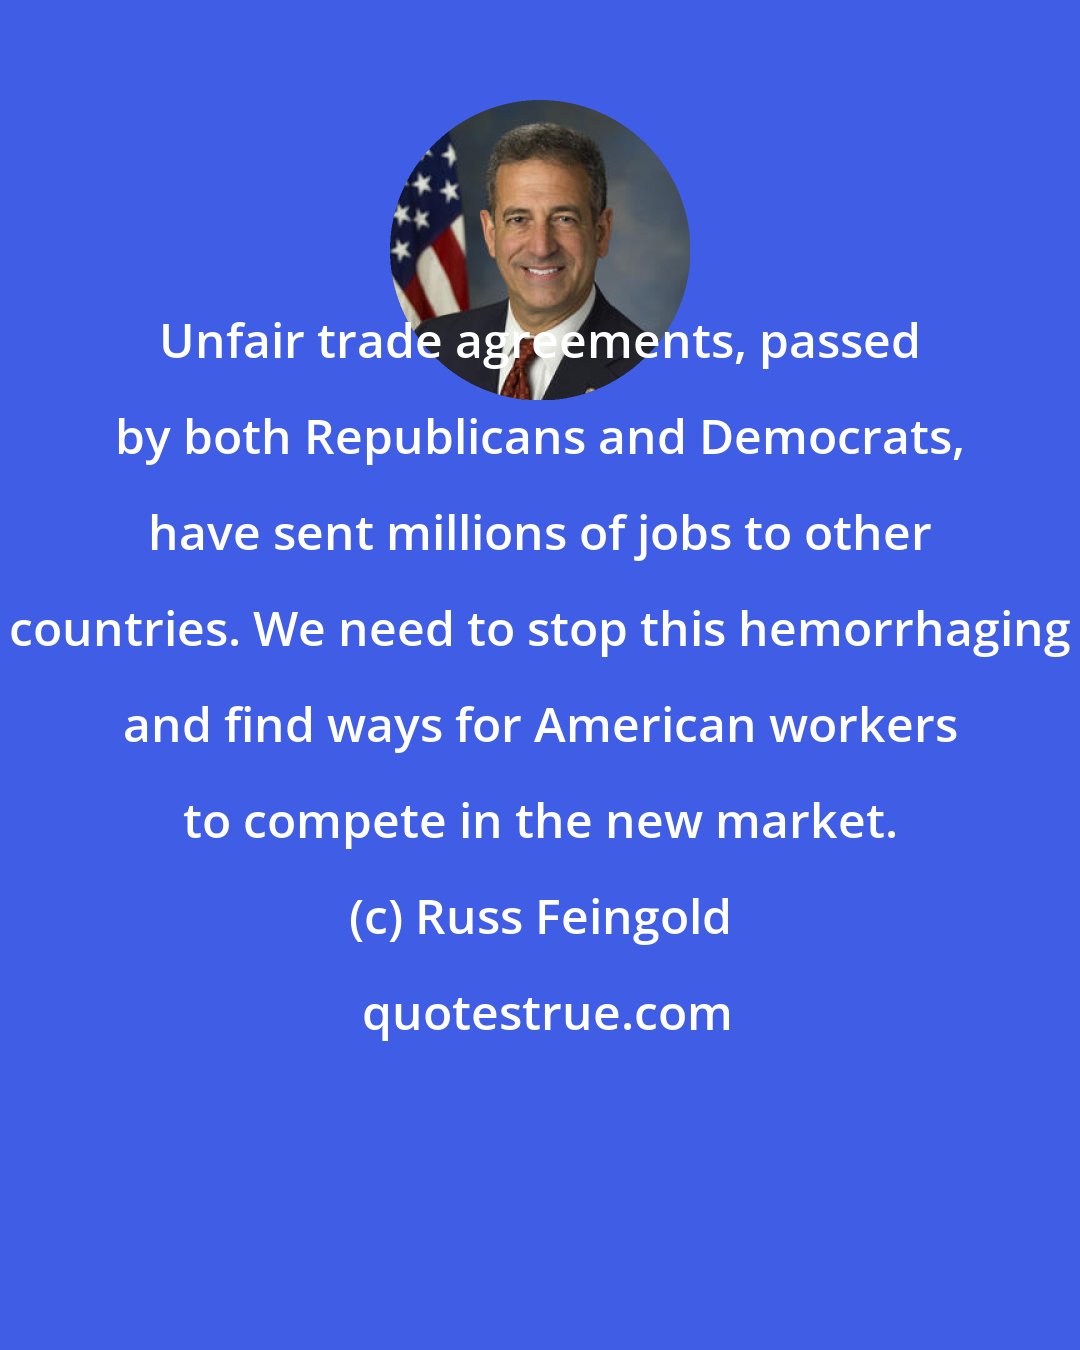 Russ Feingold: Unfair trade agreements, passed by both Republicans and Democrats, have sent millions of jobs to other countries. We need to stop this hemorrhaging and find ways for American workers to compete in the new market.